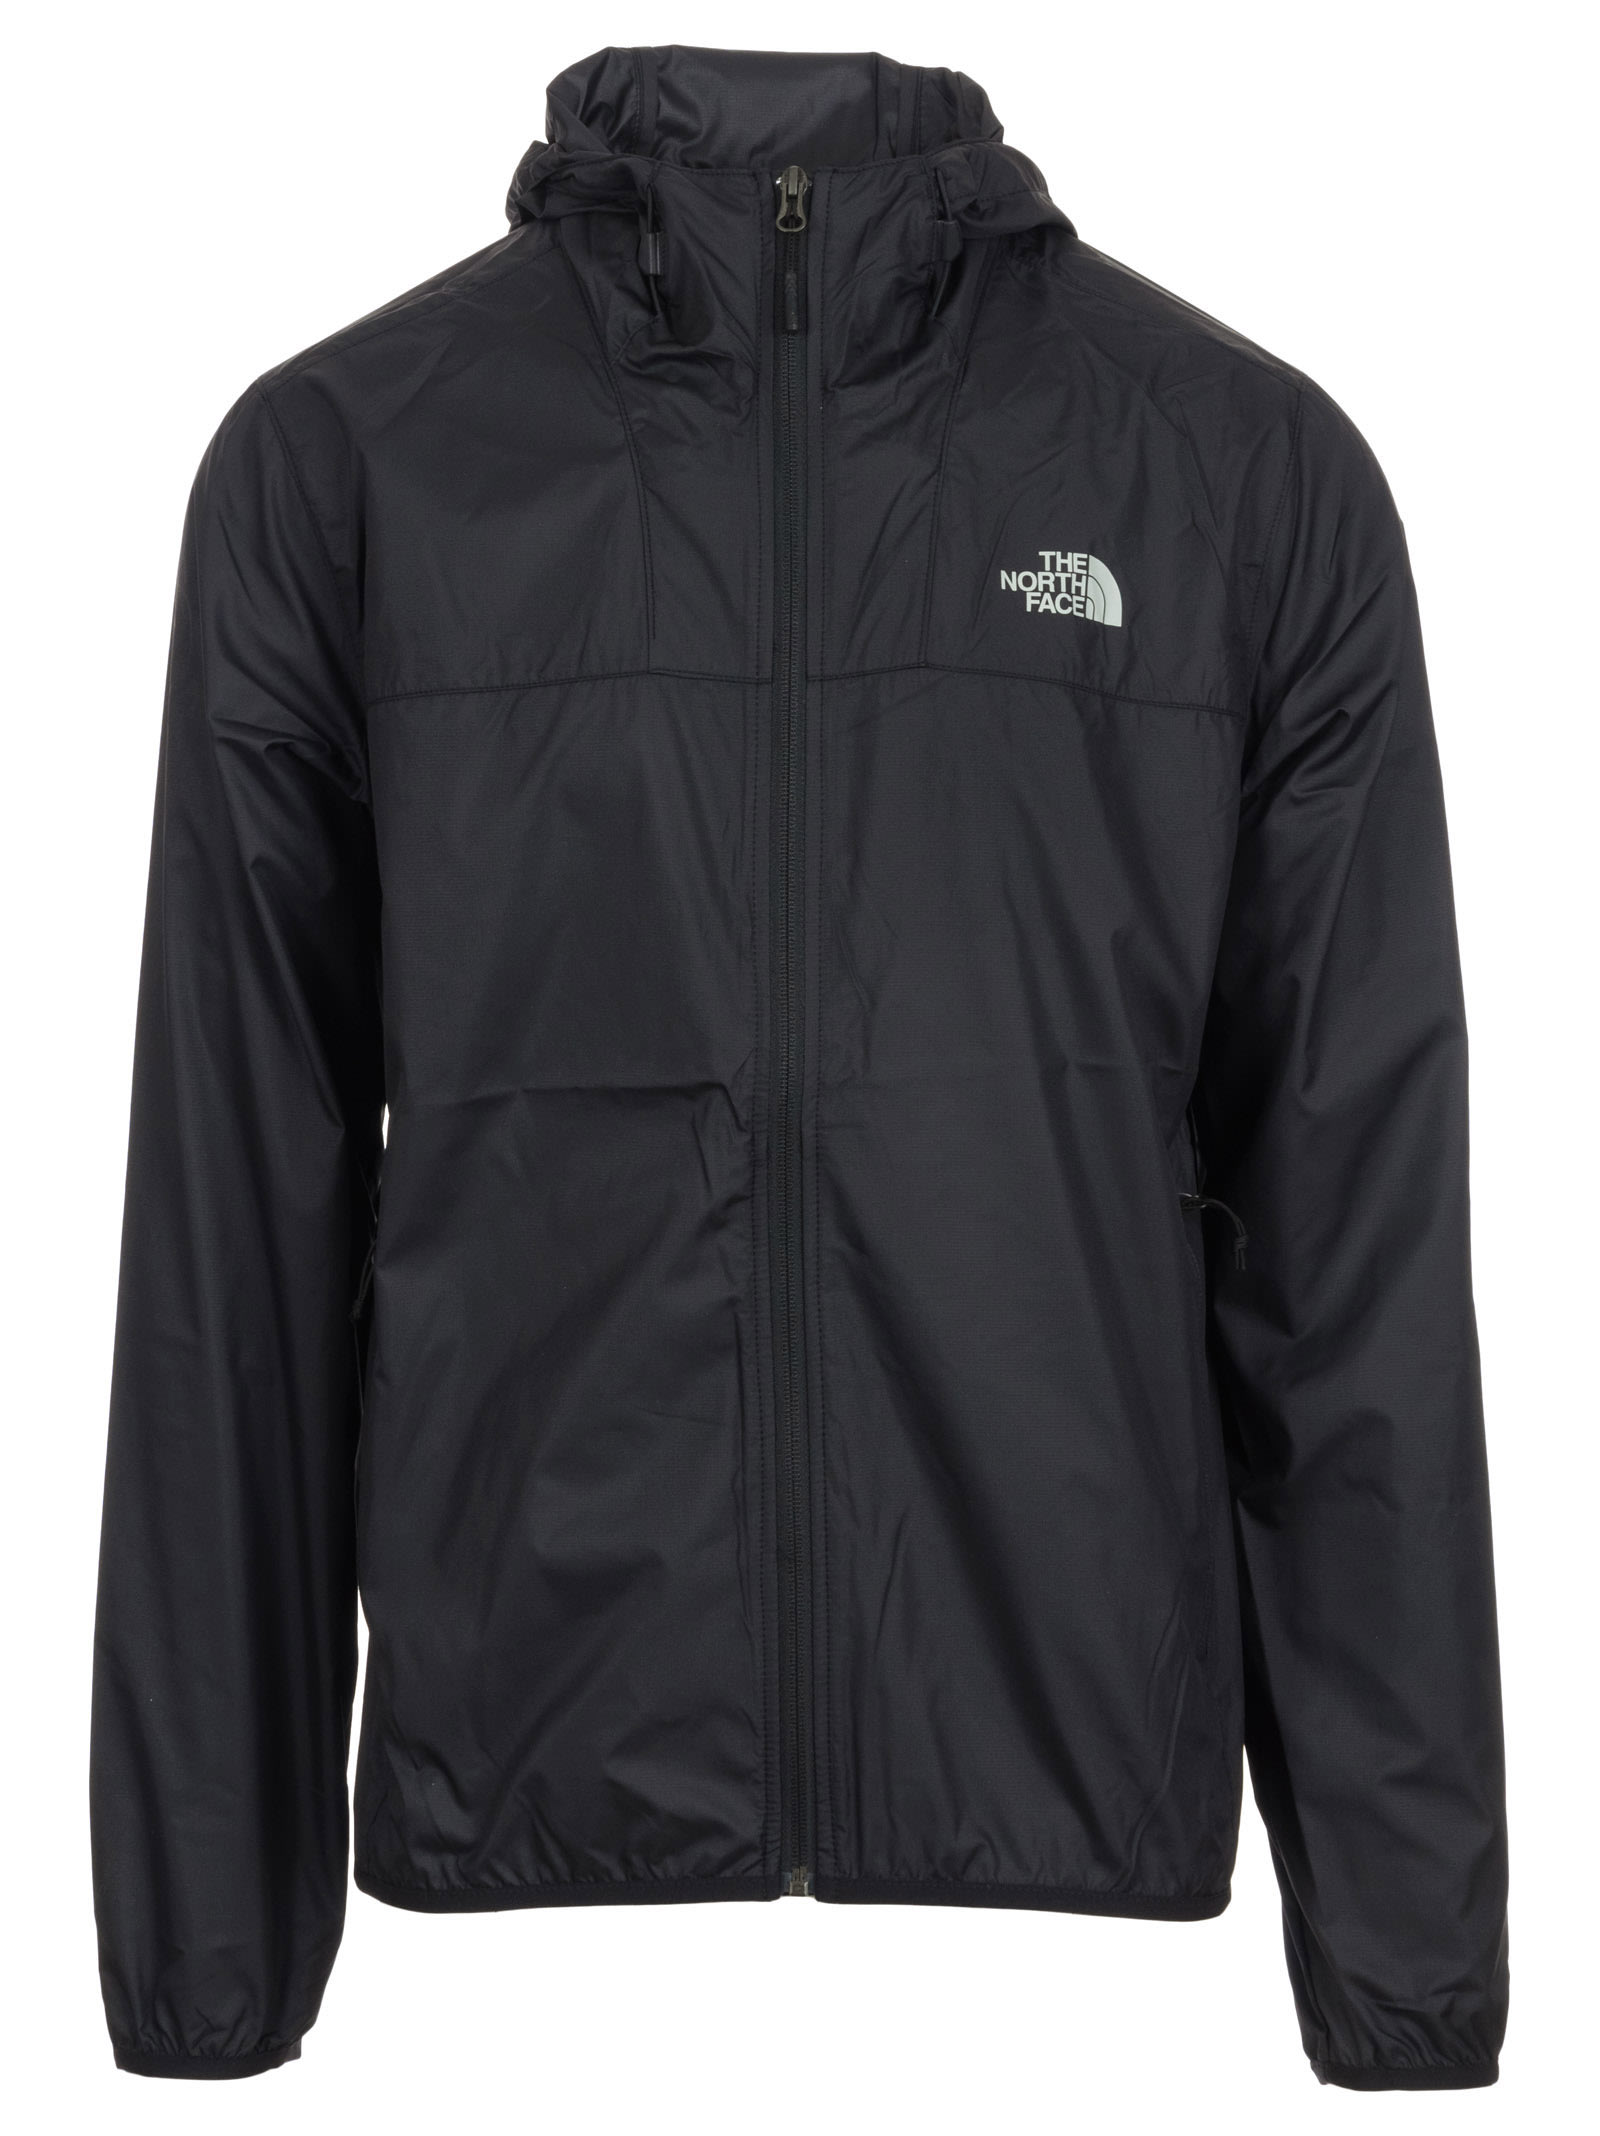 The North Face The North Face Rainproof Jacket - Black - 10870138 | italist